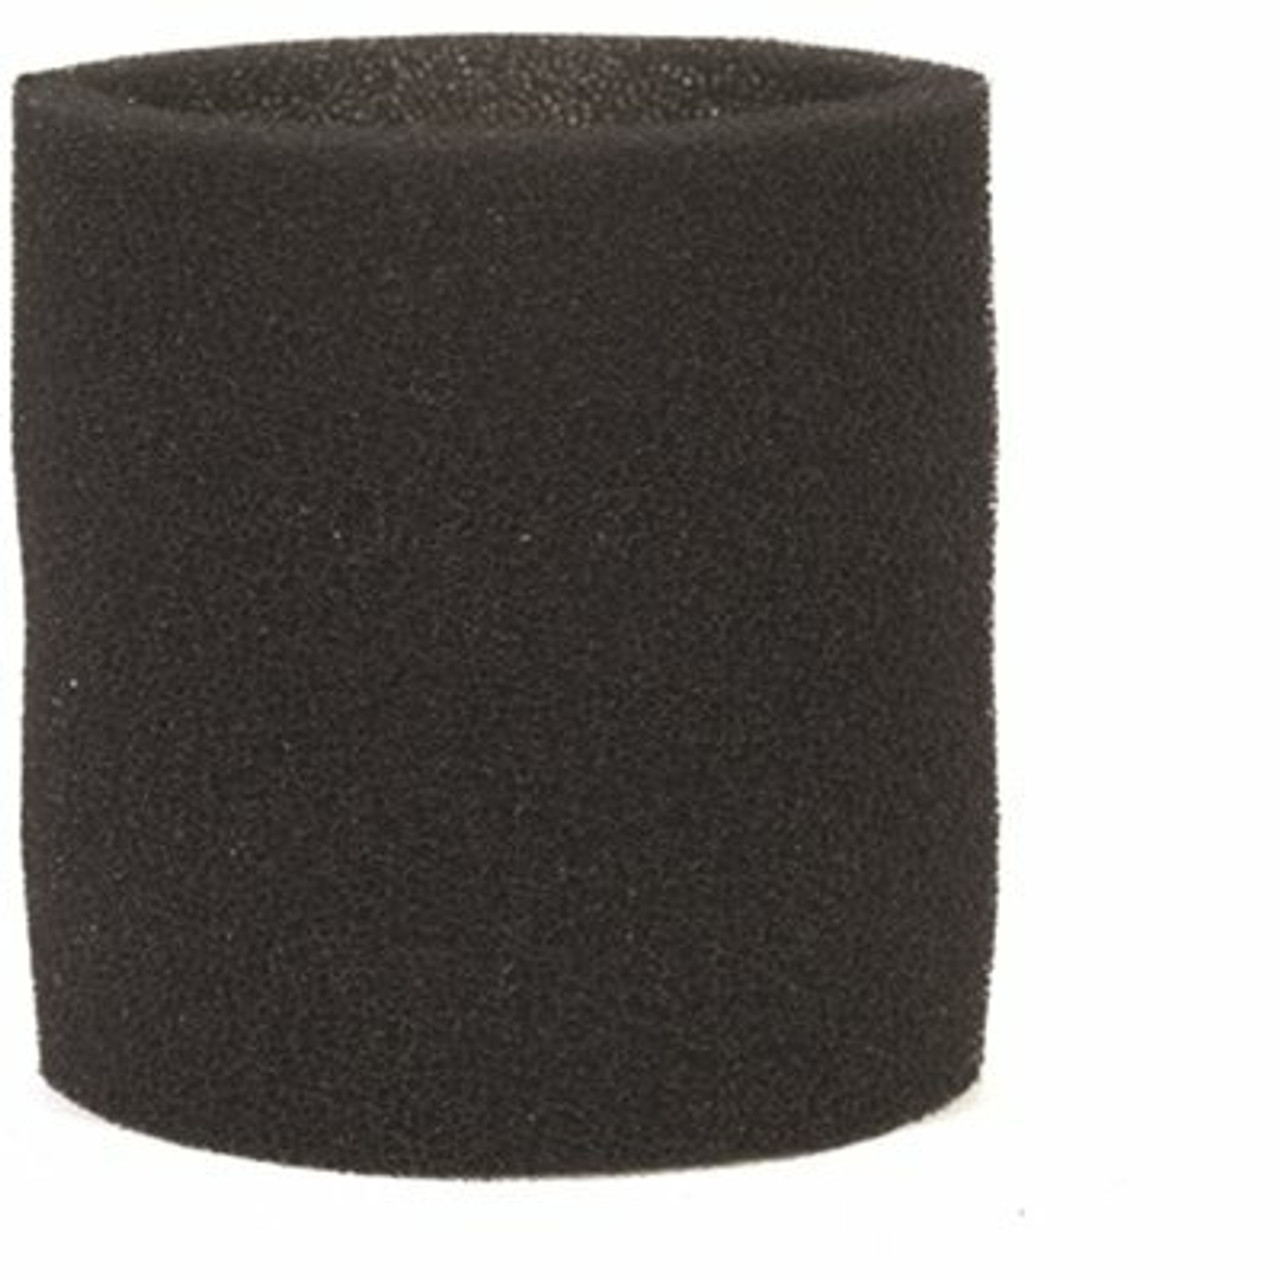 Multi Fit Wet Filter Foam Sleeve For Select Shop-Vac Branded Wet/Dry Shop Vacuums